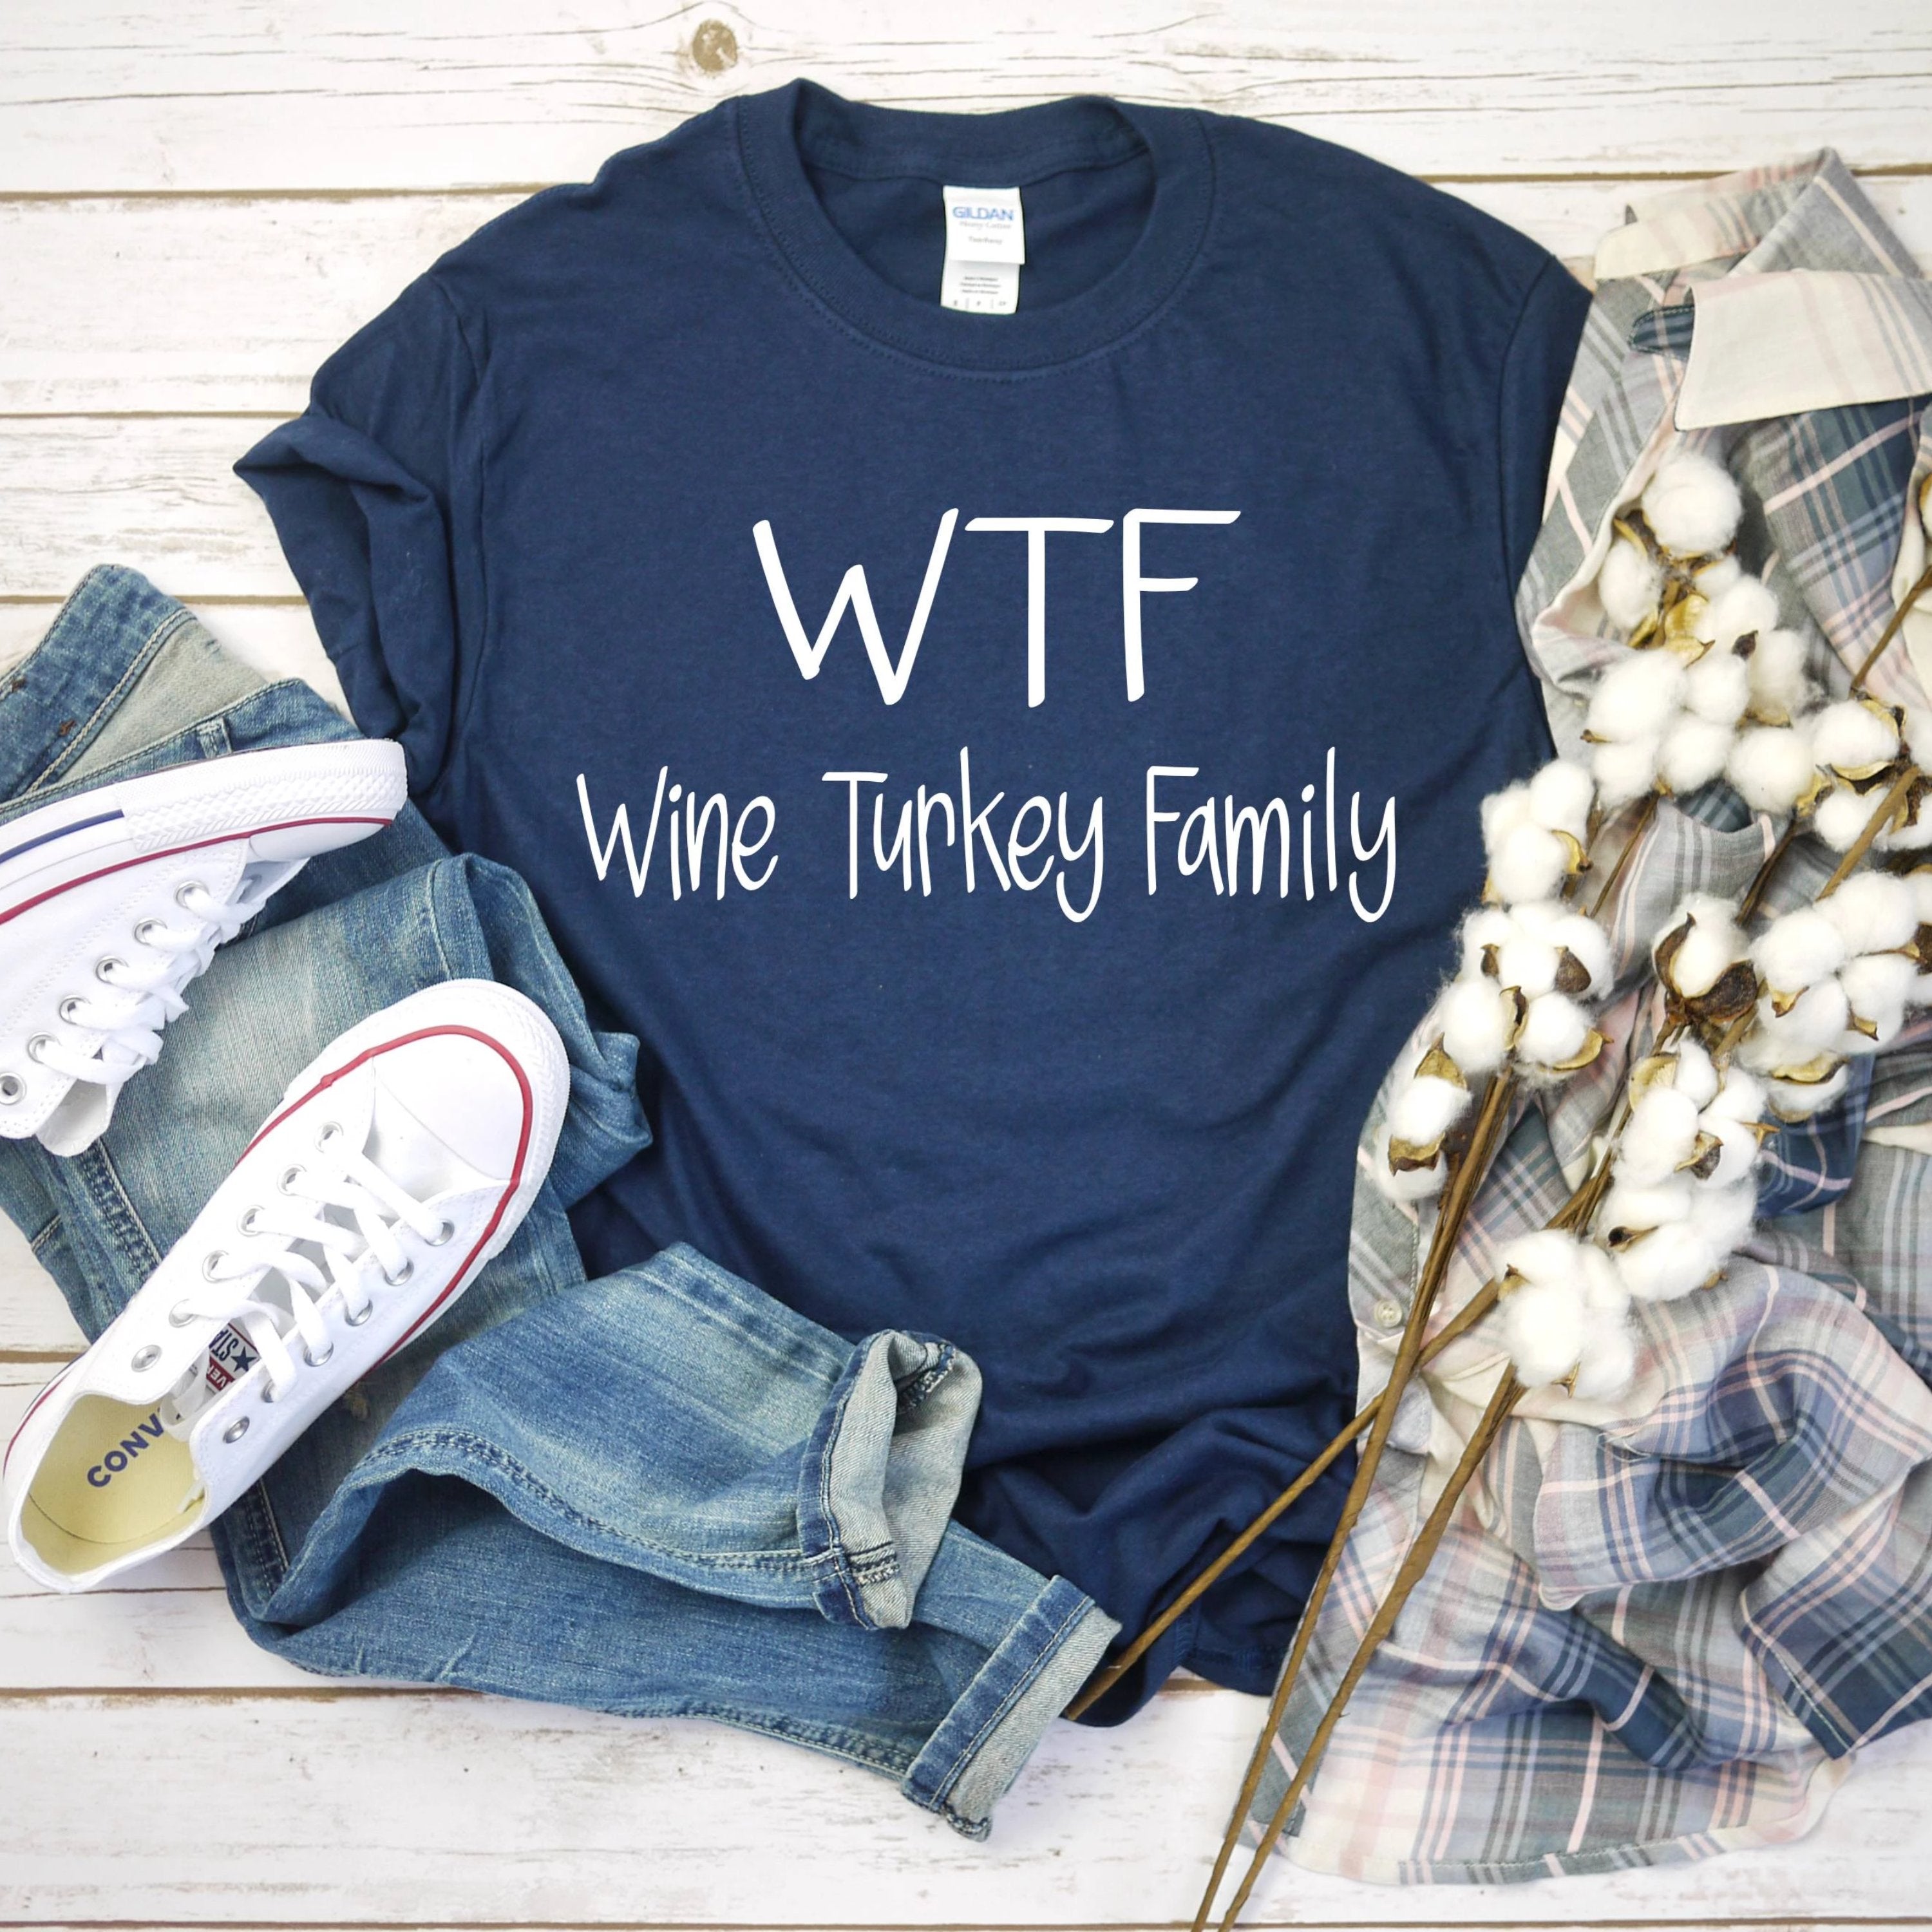 WTF Friendsgiving T-Shirt - Southern Ivy Boutique